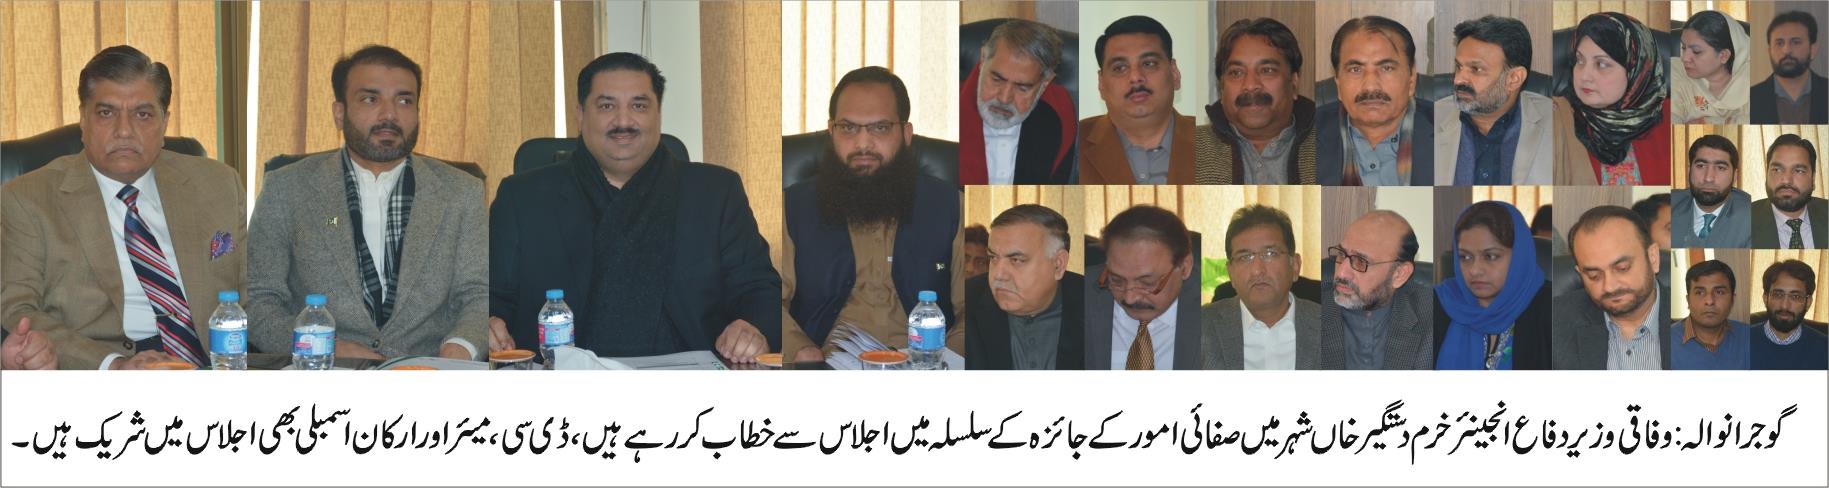  Federal Minister Defense Engineer Khurram Dastgir Khan chaired a review meeting regarding cleanliness situation of city